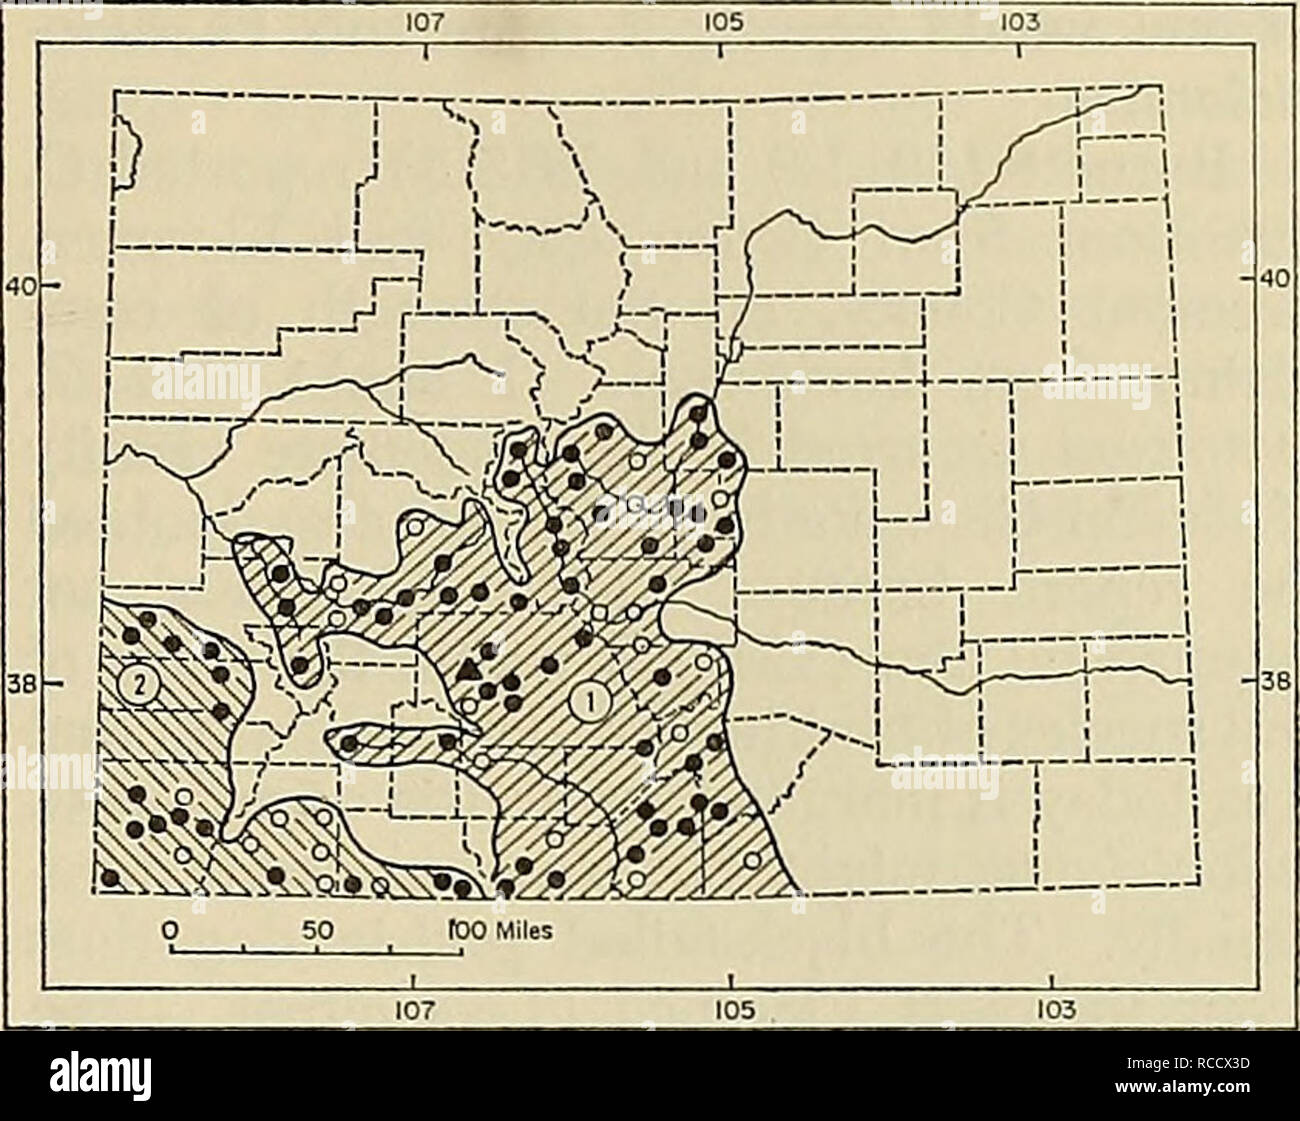 . Distribution of mammals in Colorado. Mammals. 1972 ARMSTRONG: COLORADAN MAMMALS 139 those inhabited by Cynomys leucurus farther north. Cynomys gunnisoni is the smallest of Colo- radan prairie dogs. Superficially, Gunnison's prairie dog and the white-tailed prairie dog are similar, but they differ in average size, color, and cranial details, as well as in habitat preferences and details of social organization (see Lechleitner, 1969). Burnett and McCampell (1926a) discussed the natural history of the southwestern sub- species, C. g. zuniensis. Longhurst (1944) studied ecology of the nominate r Stock Photo